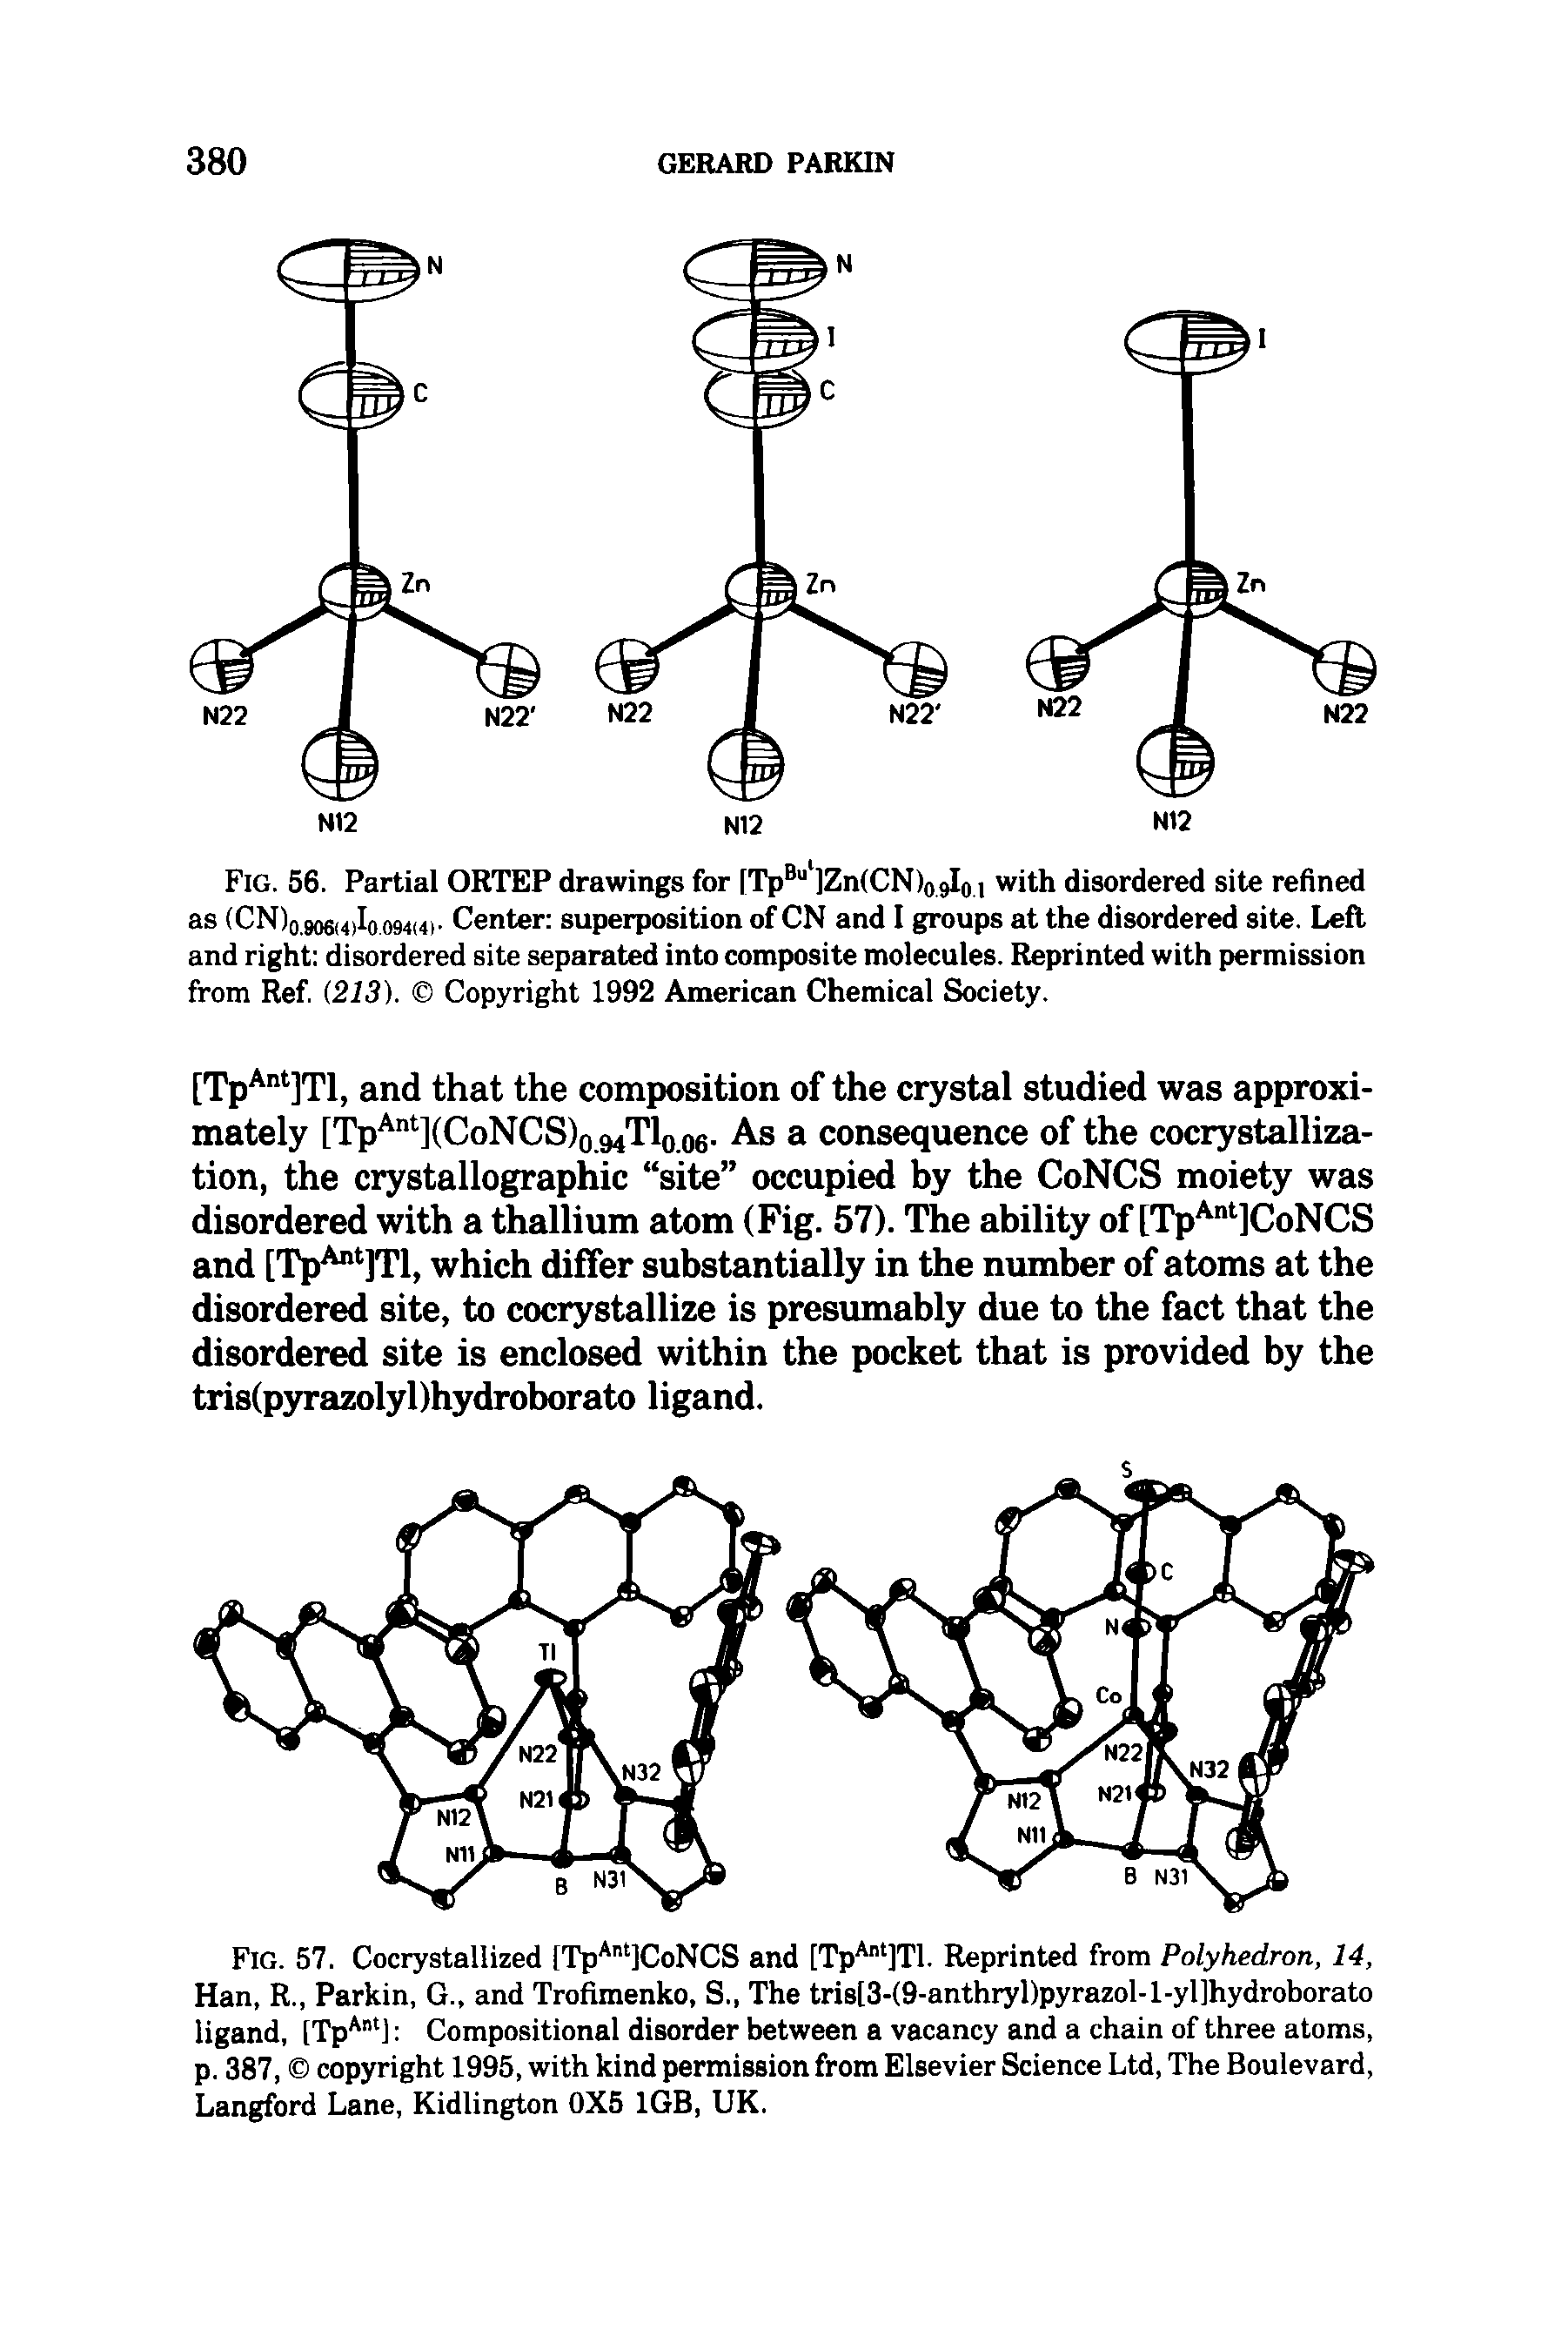 Fig. 56. Partial ORTEP drawings for [TpB l]Zn(CN)09Io 1 with disordered site refined as (CN)0.906(4)Io.094(4> Center superposition of CN and I groups at the disordered site. Left and right disordered site separated into composite molecules. Reprinted with permission from Ref. (213). Copyright 1992 American Chemical Society.